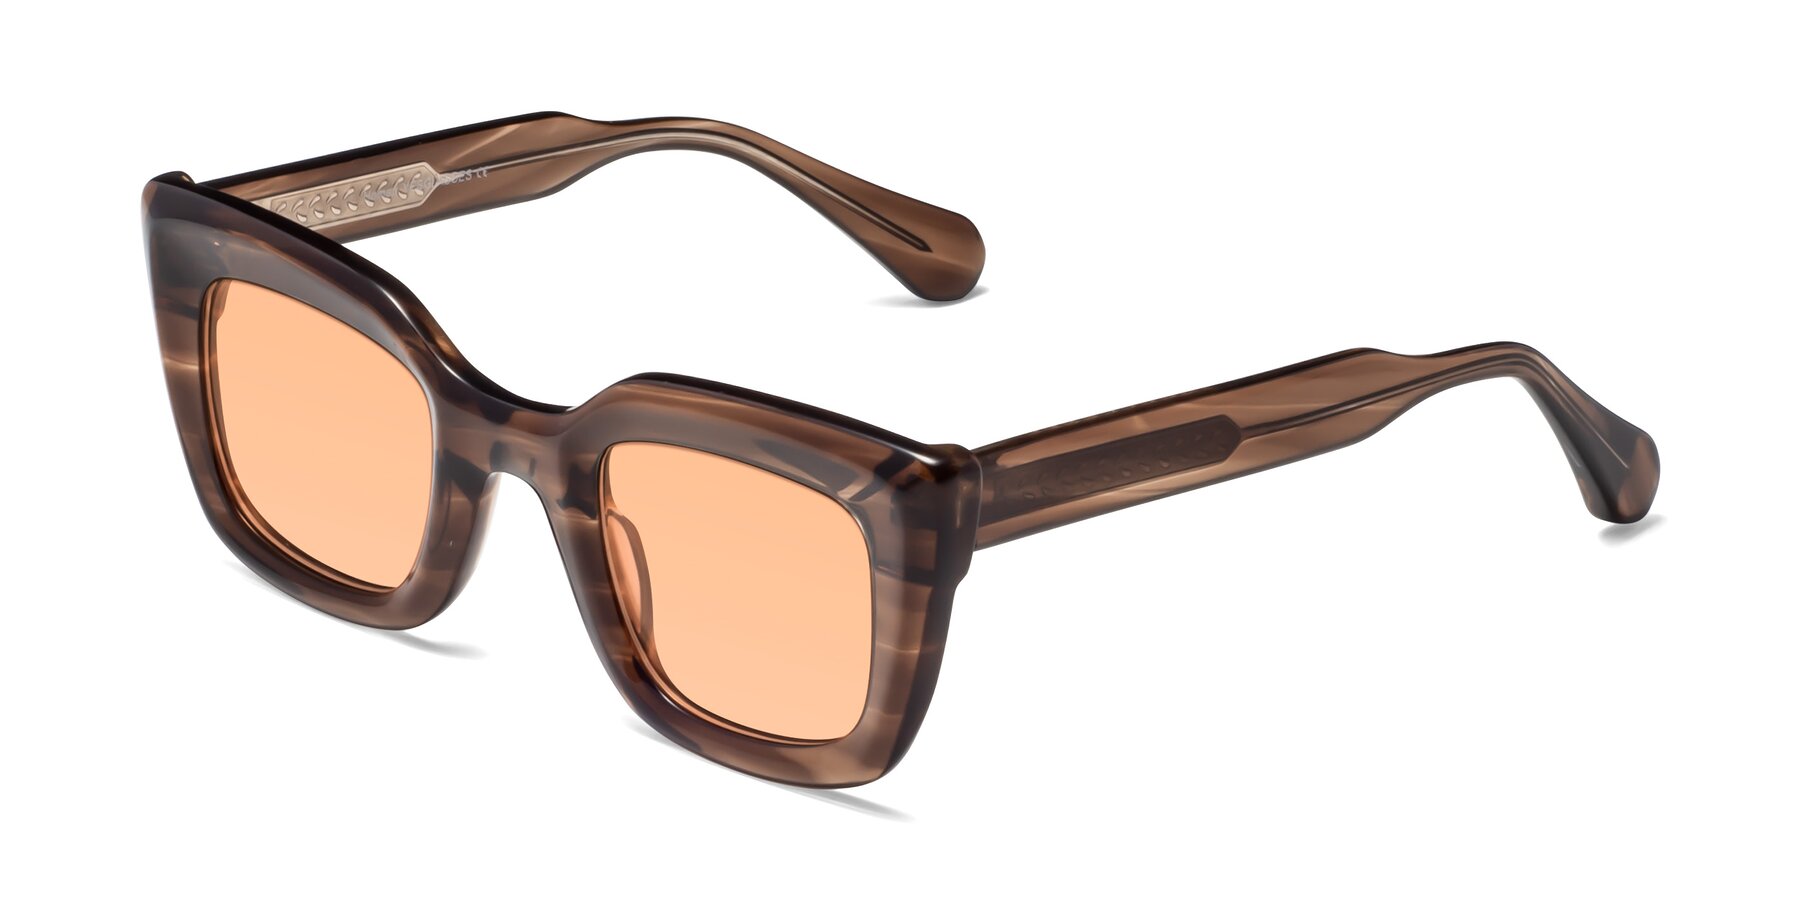 Angle of Homan in Chocolate with Light Orange Tinted Lenses